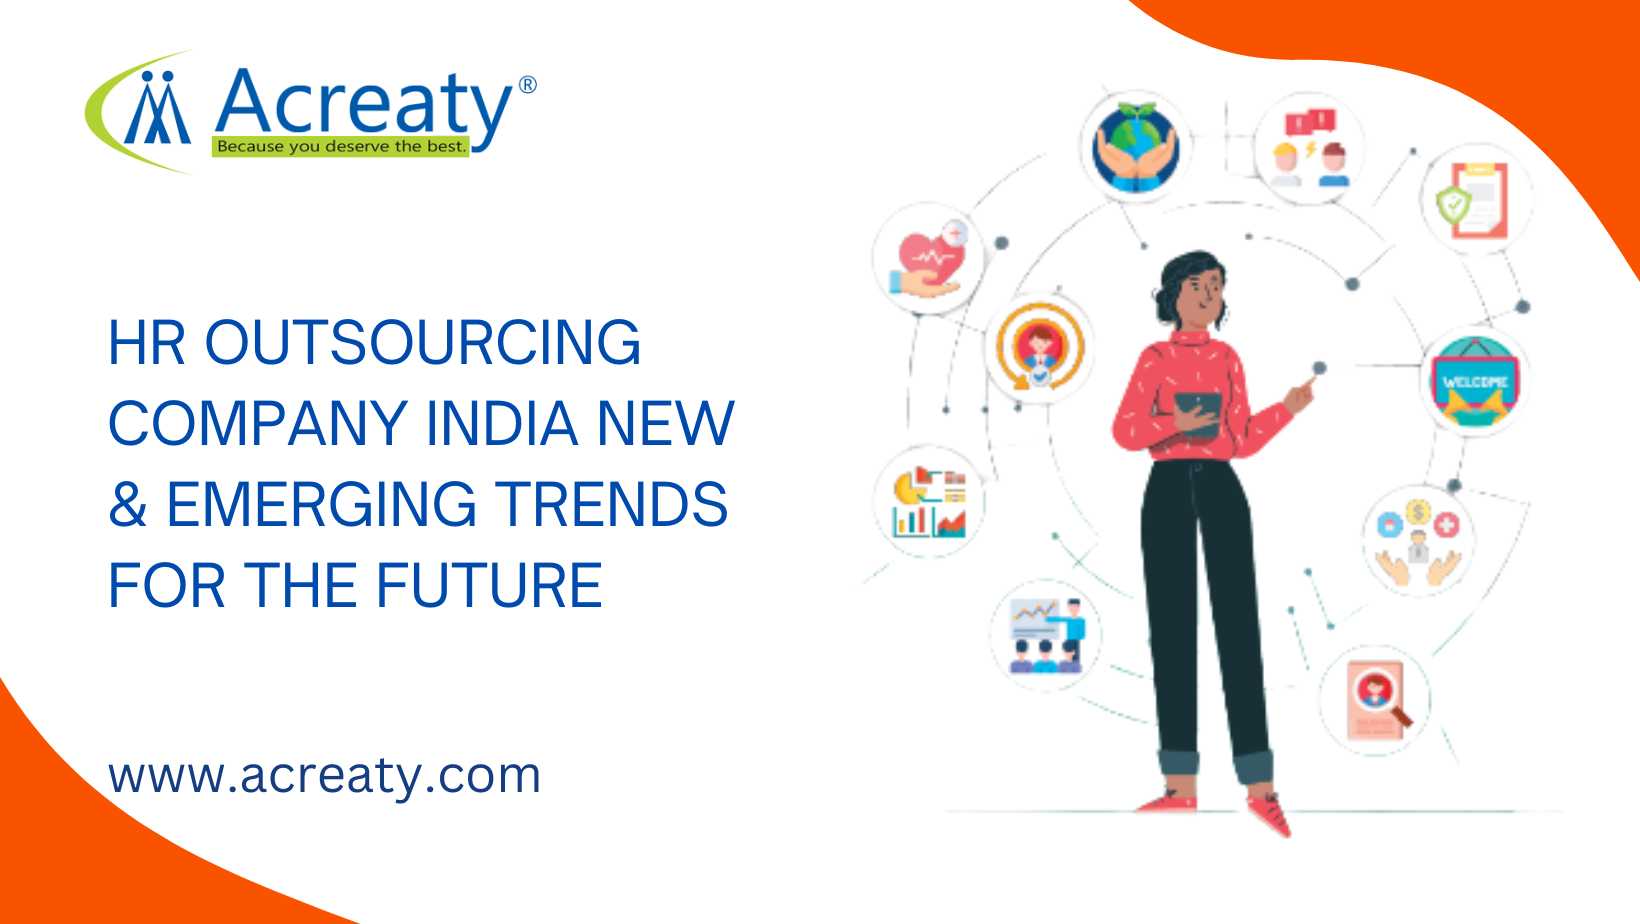 HR outsourcing company India: New & Emerging Trends for the Future 